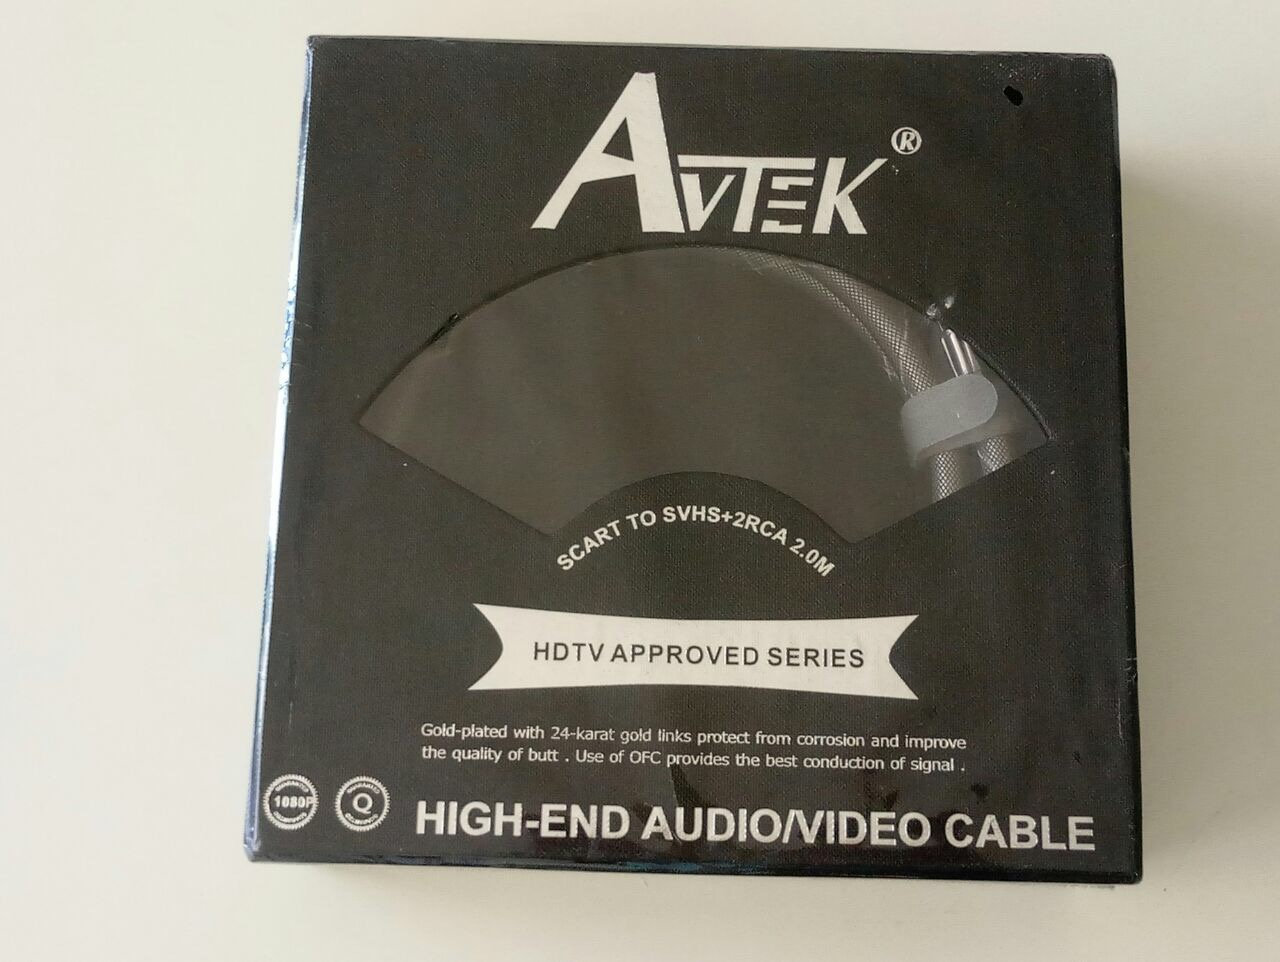 AVTEK HIGH END AUDIO/VIDEO CABLE